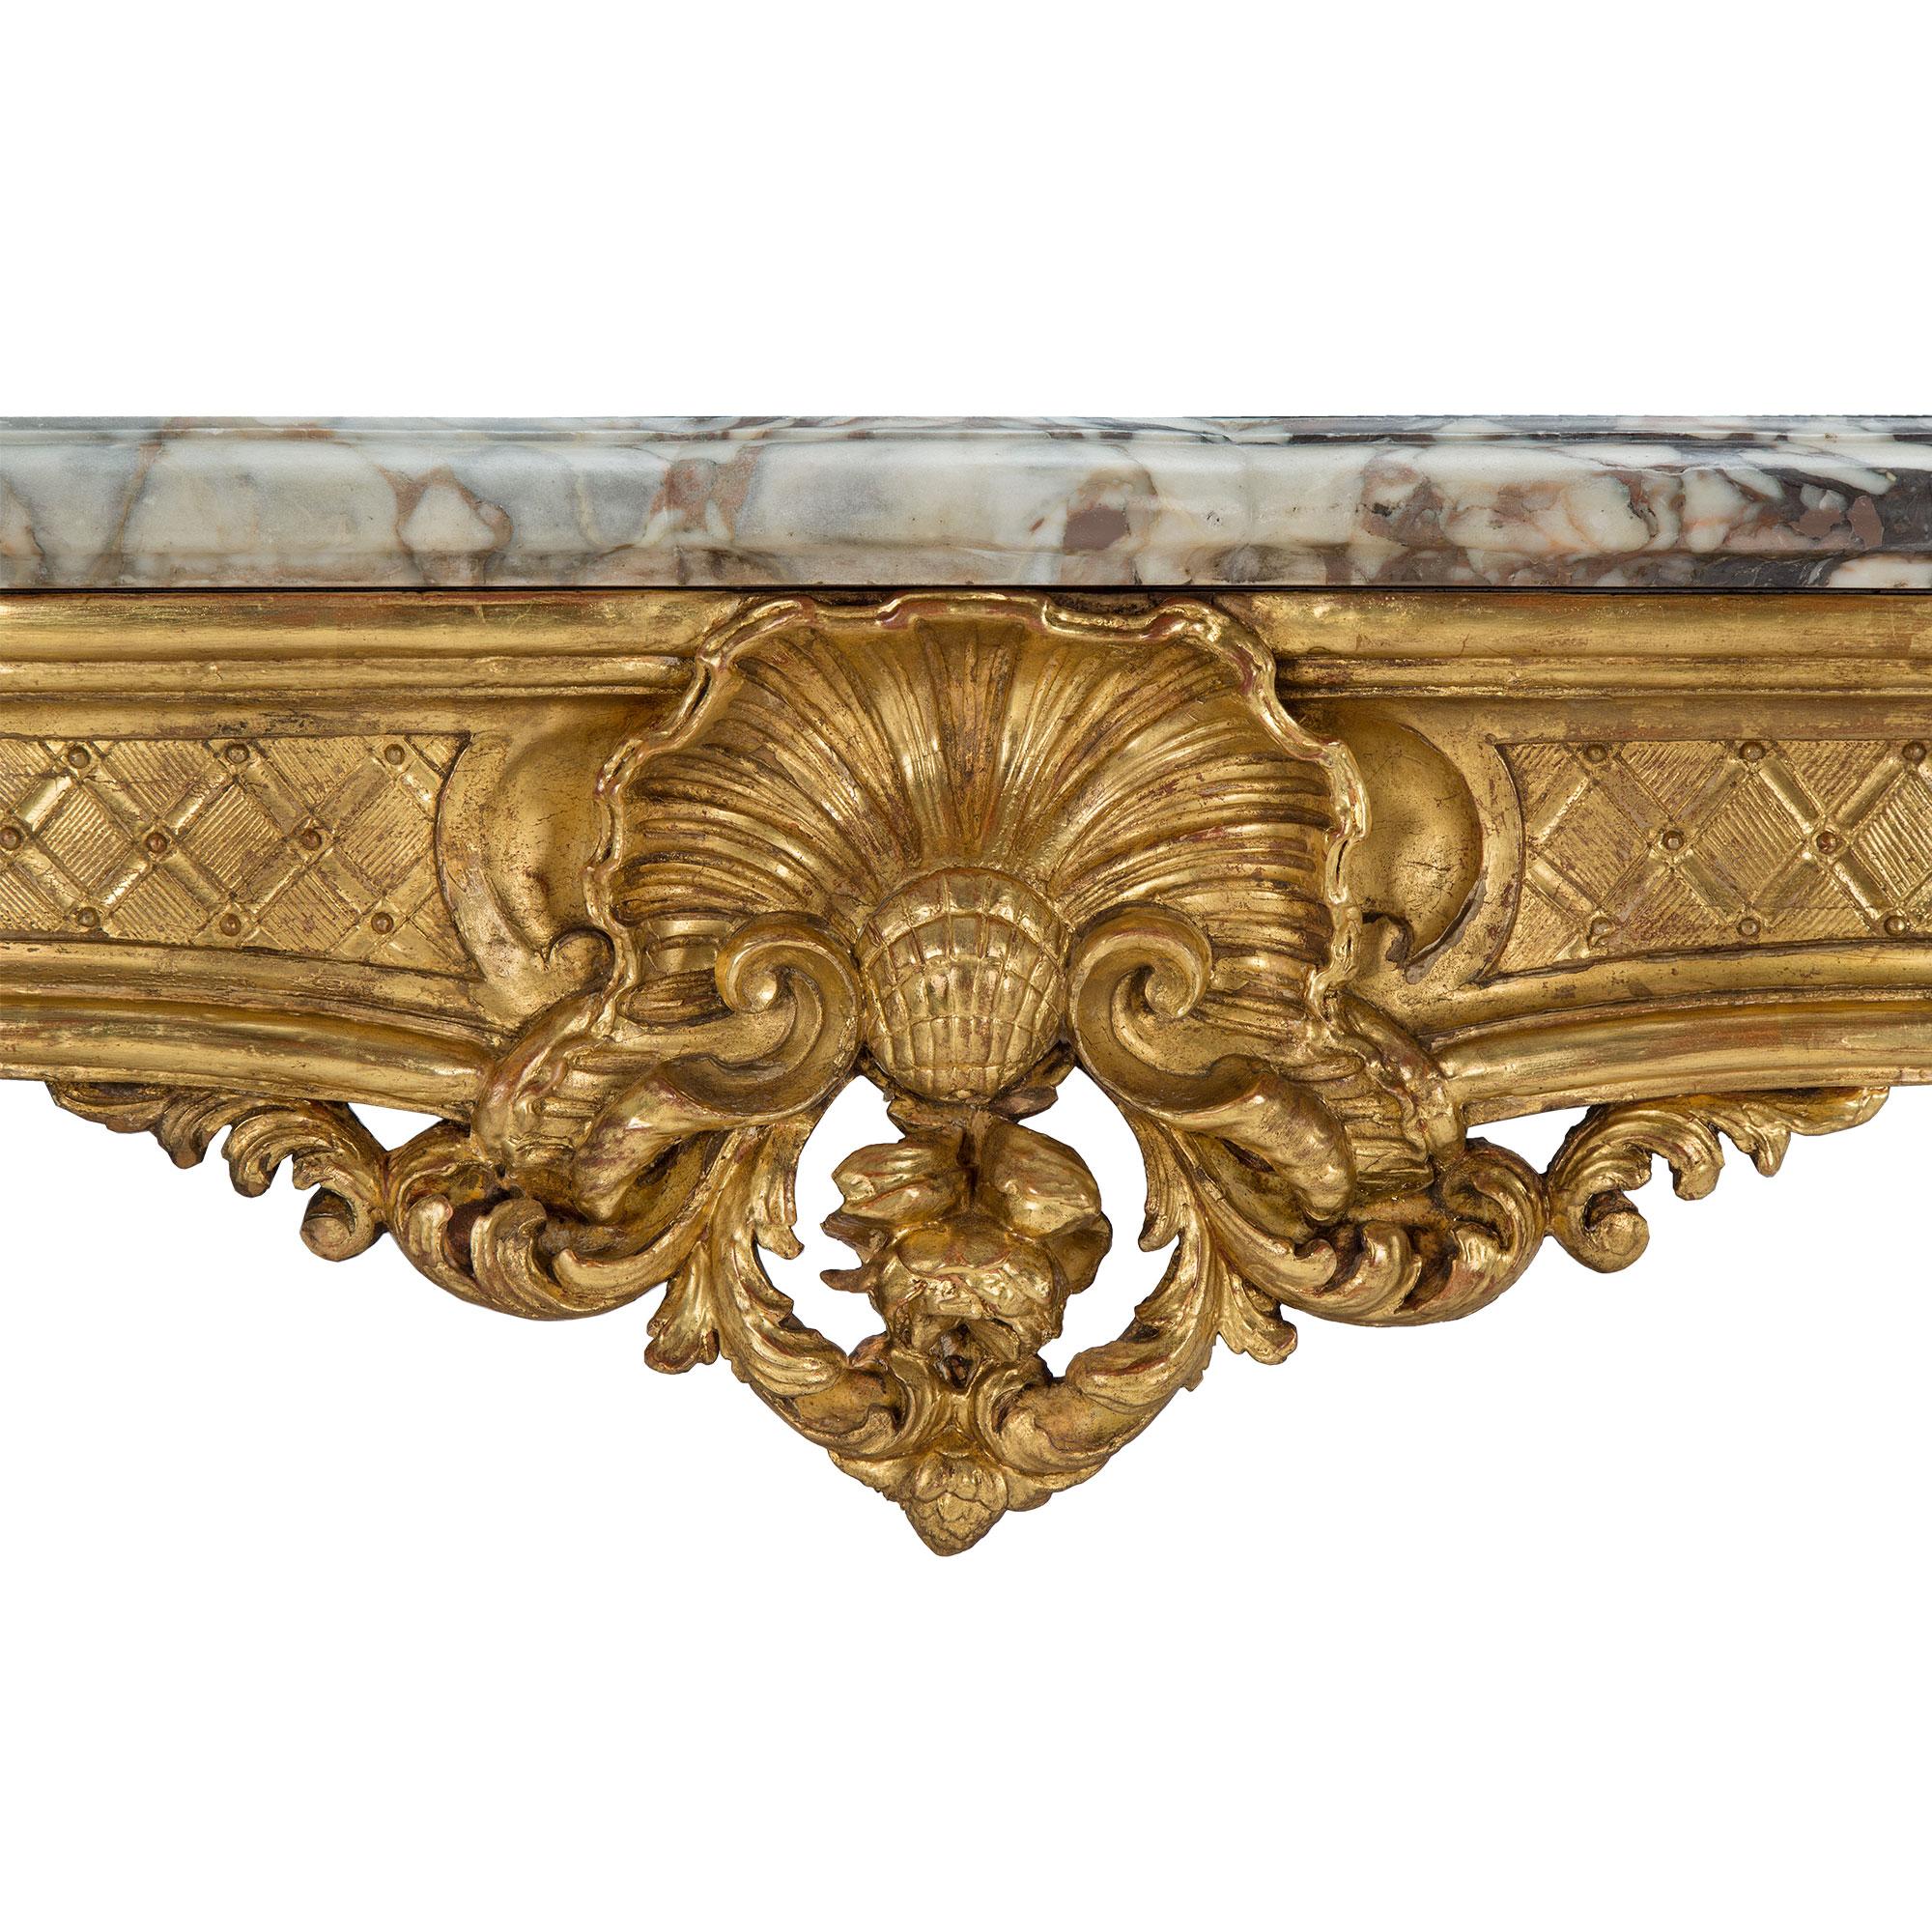 French 18th Century Regence Period Giltwood and Marble Freestanding Console For Sale 2